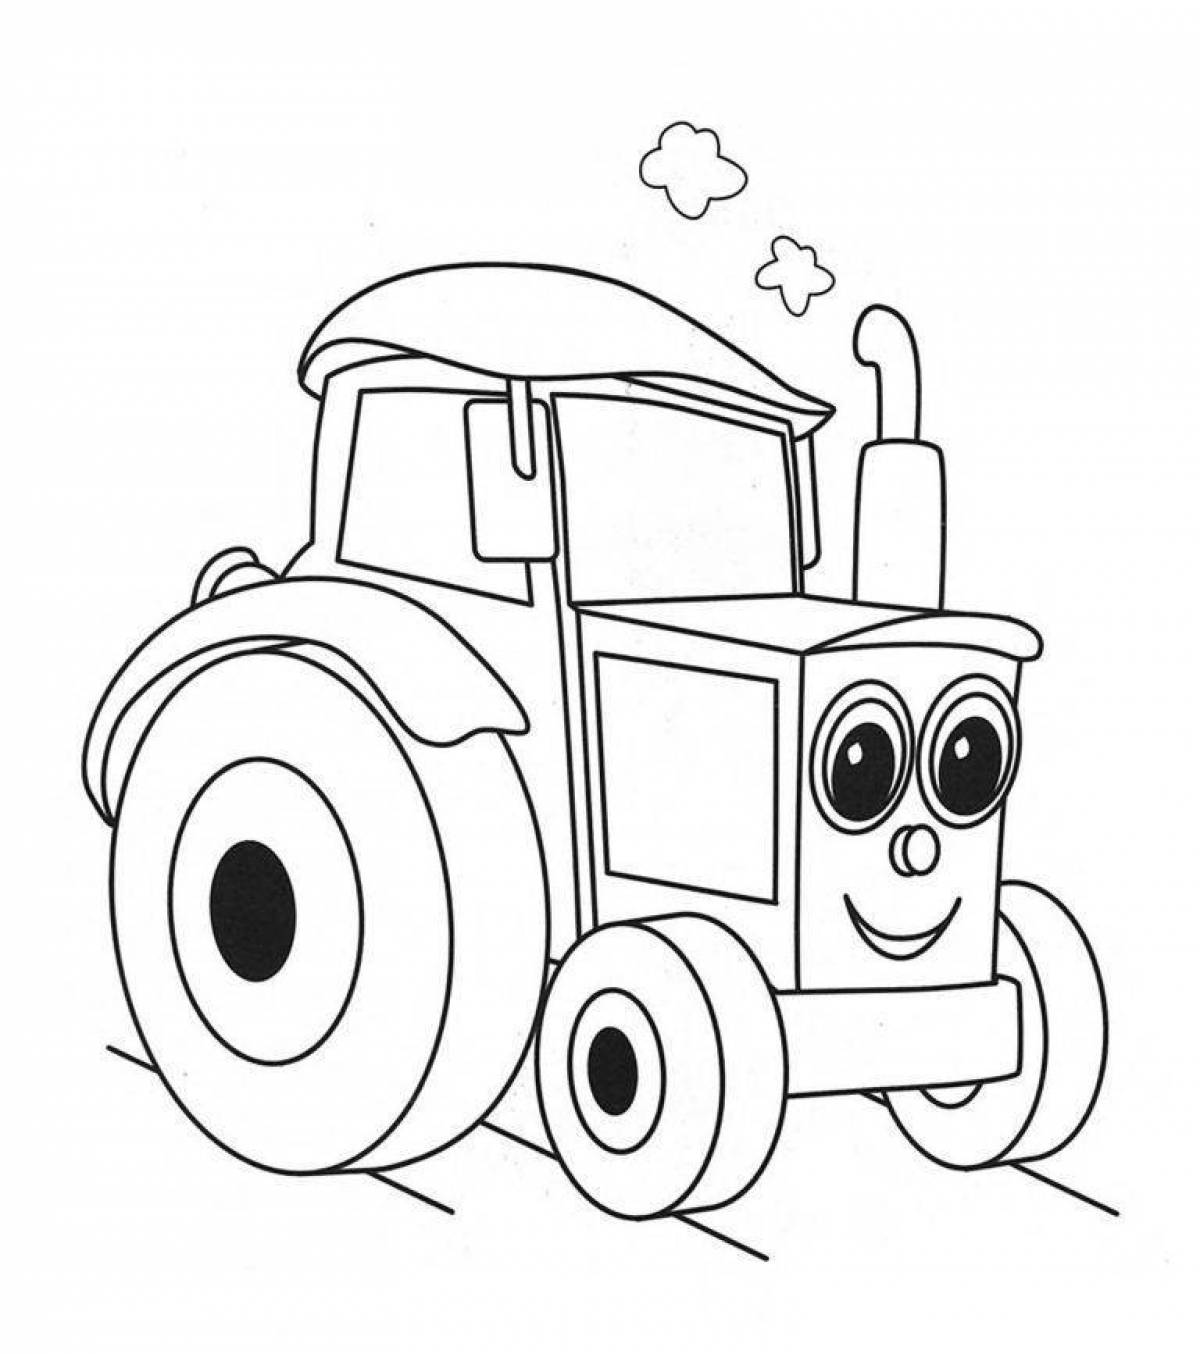 A fun car coloring book for 3-4 year olds